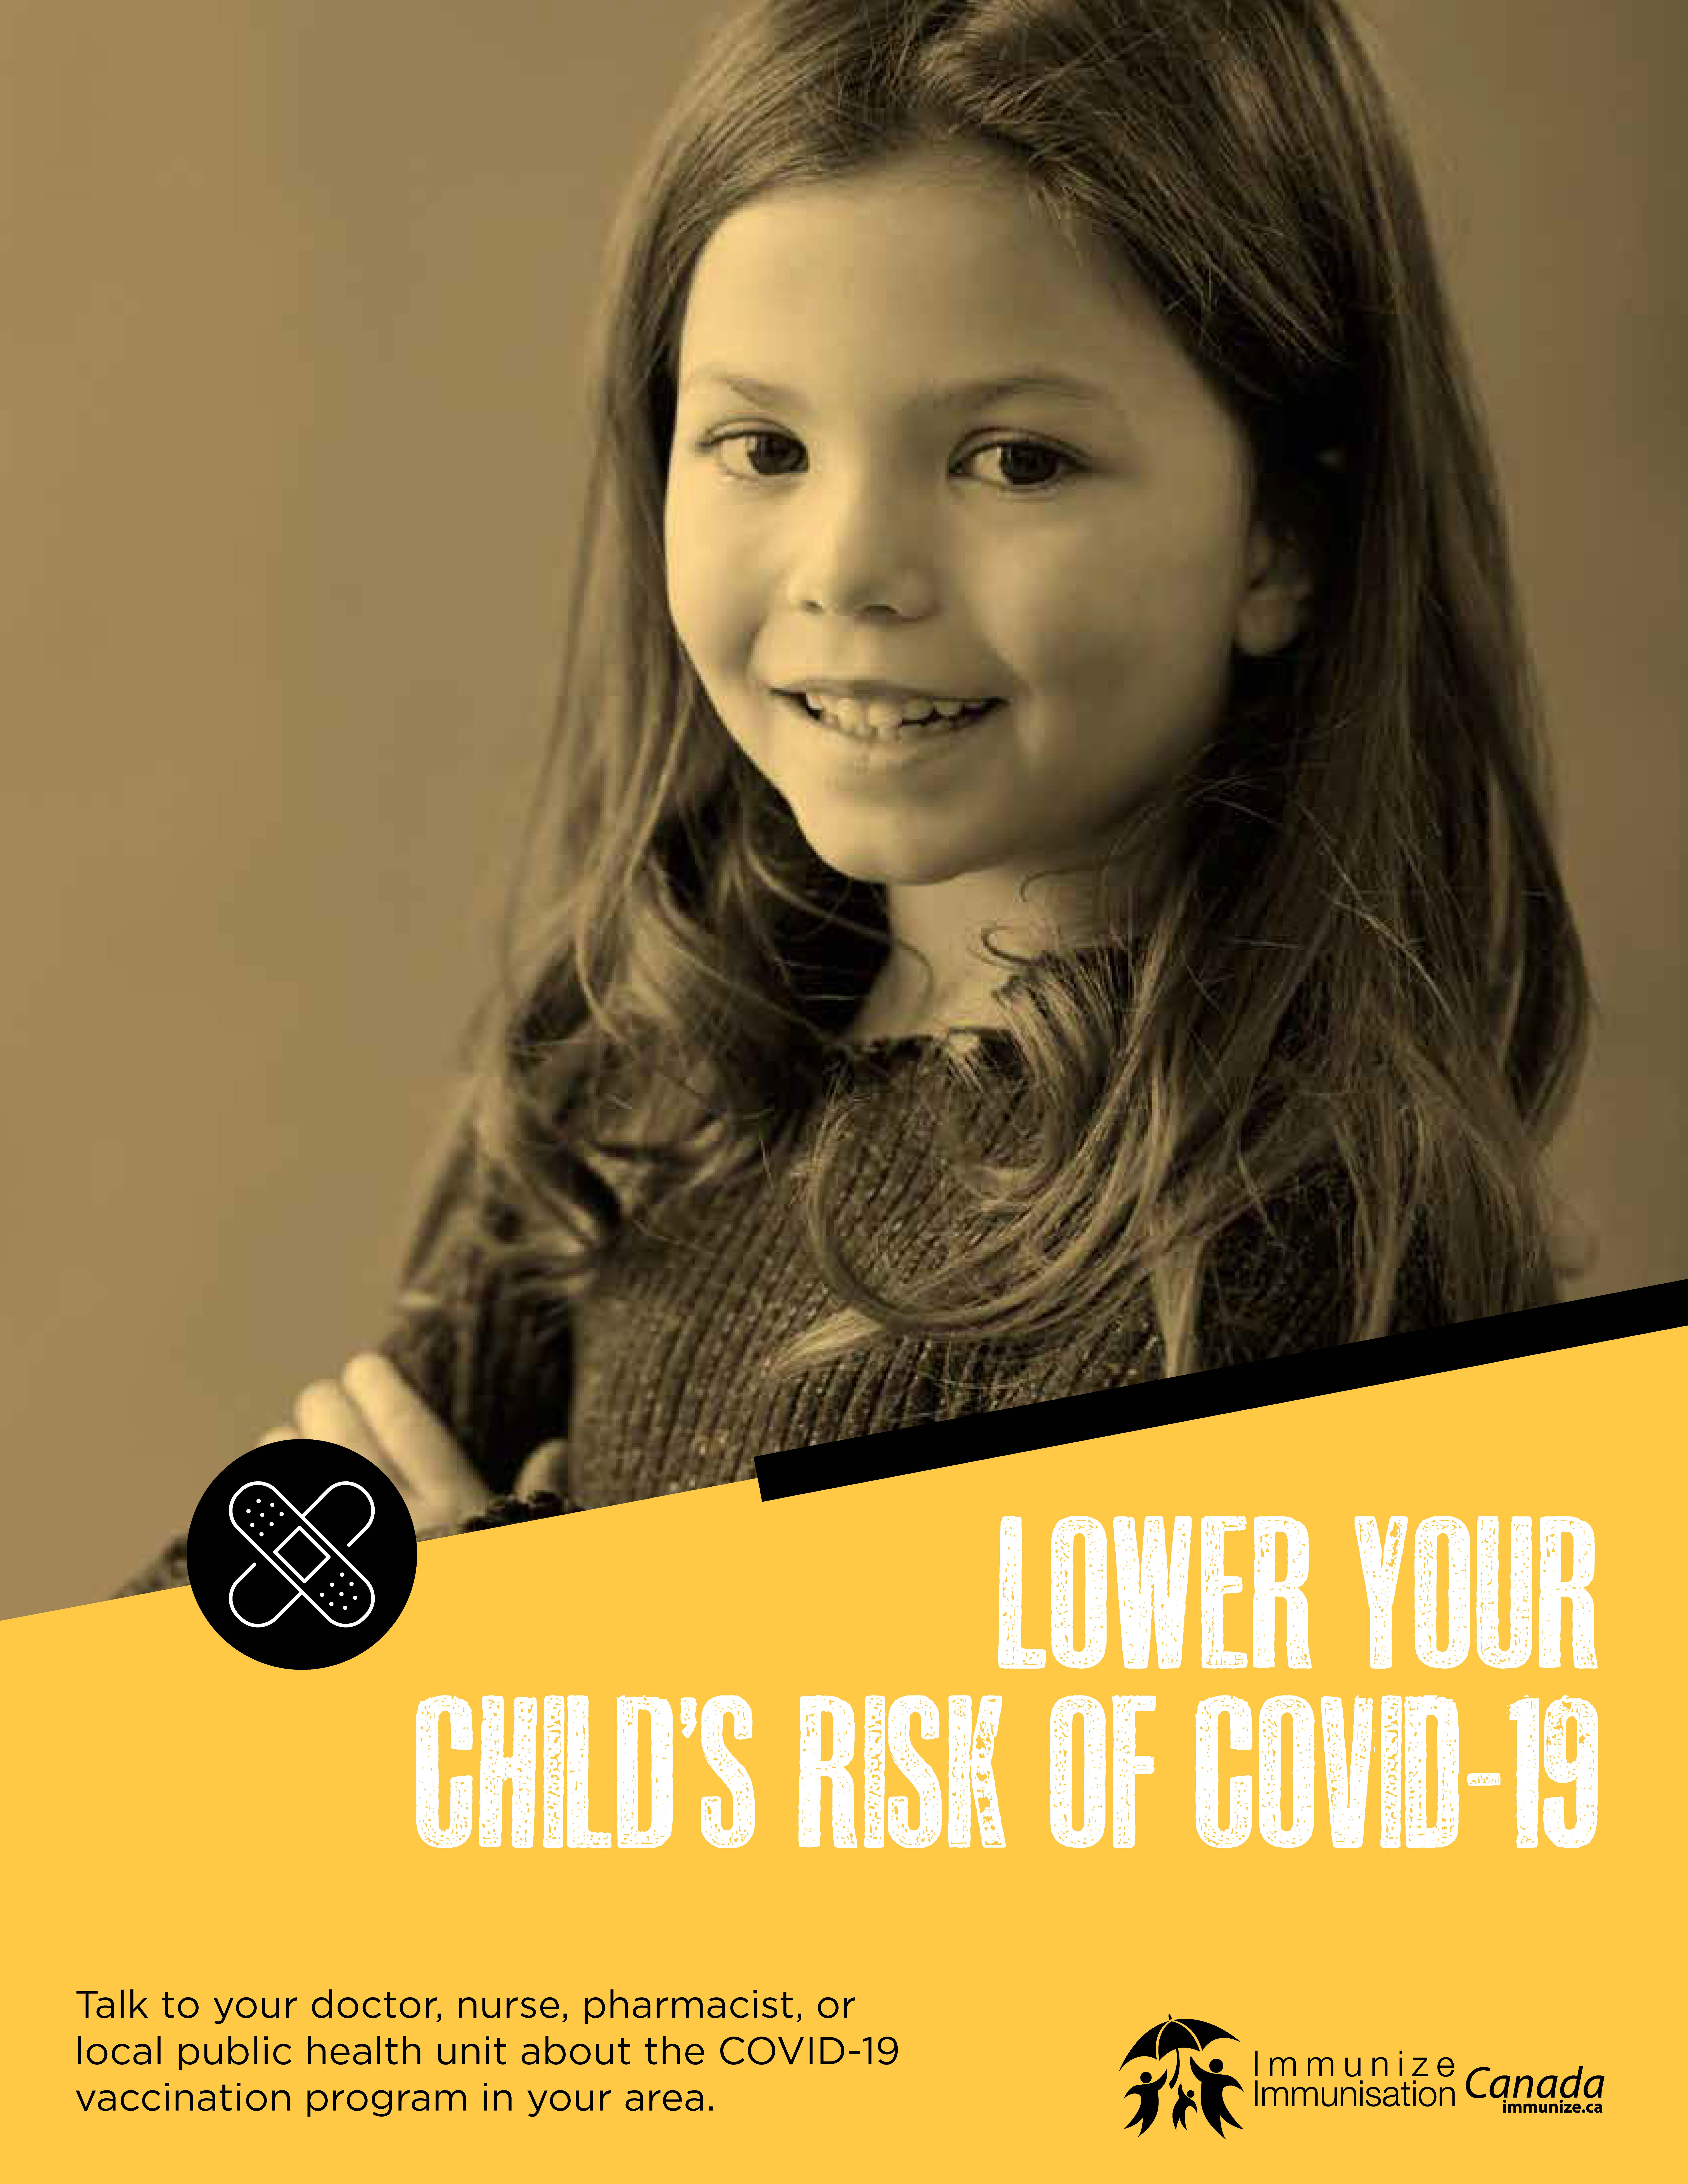 Lower your child's risk of COVID-19